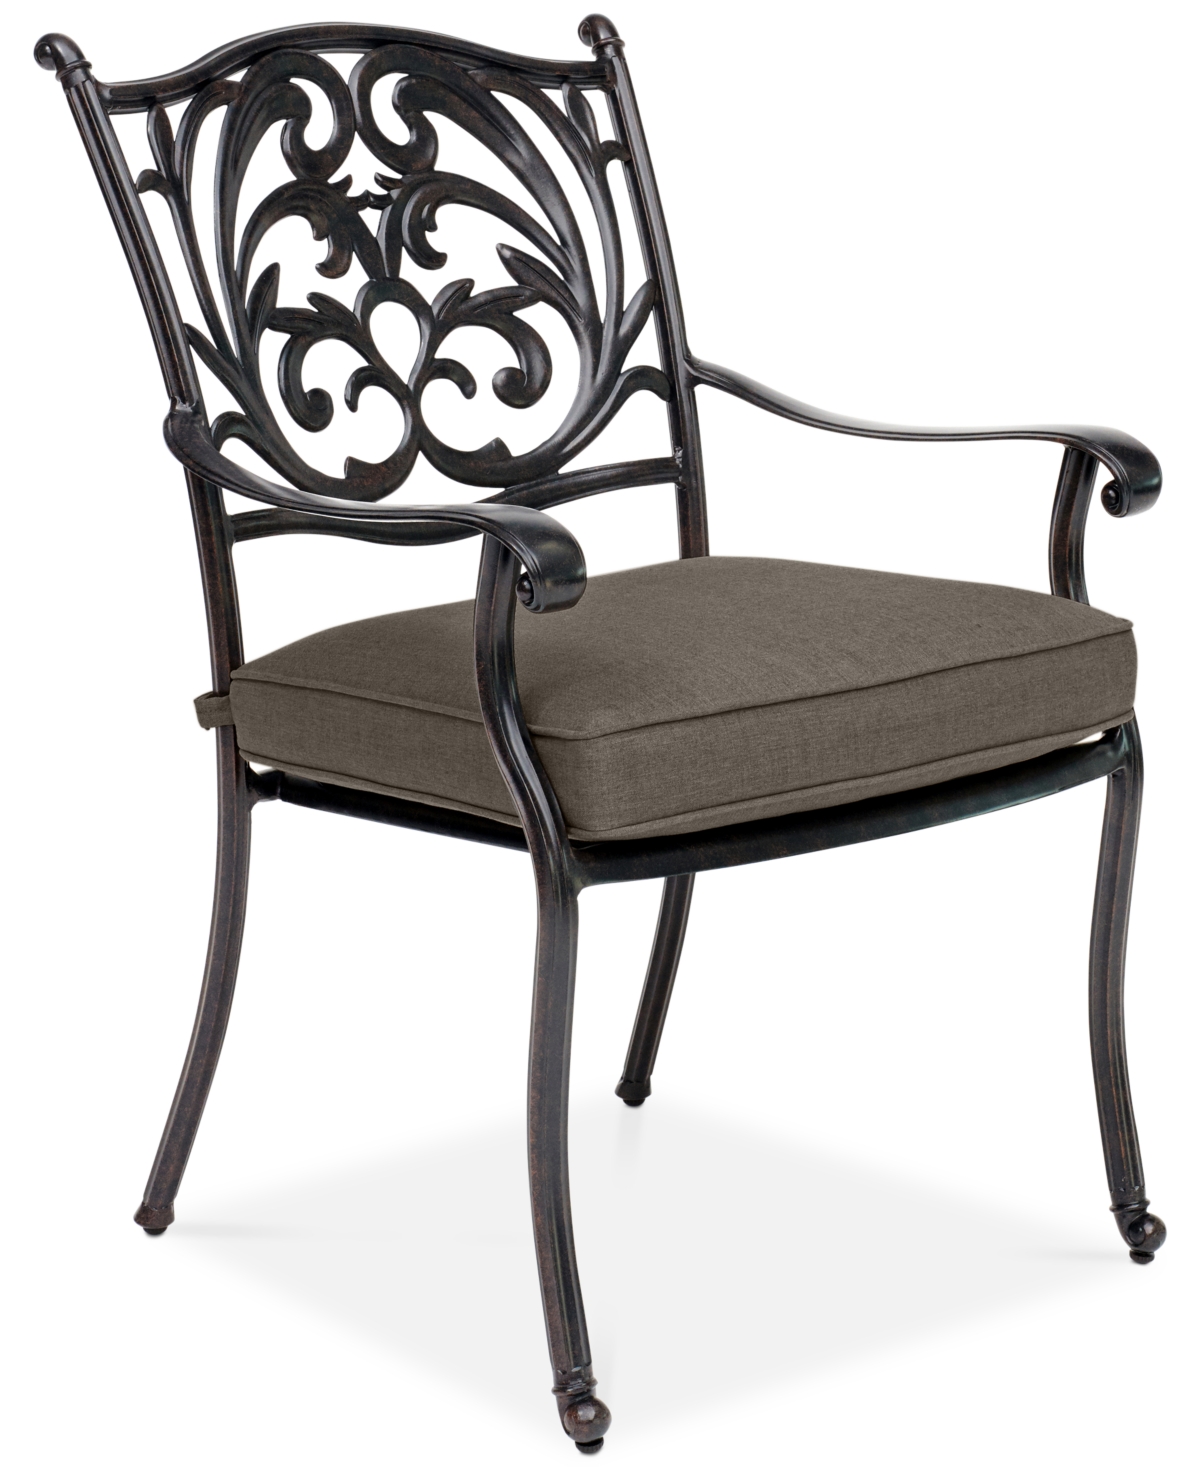 Agio Set Of 6 Chateau Aluminum Outdoor Dining Chairs With Outdoor Cushion, Created For Macy's In Outdura Storm Steel